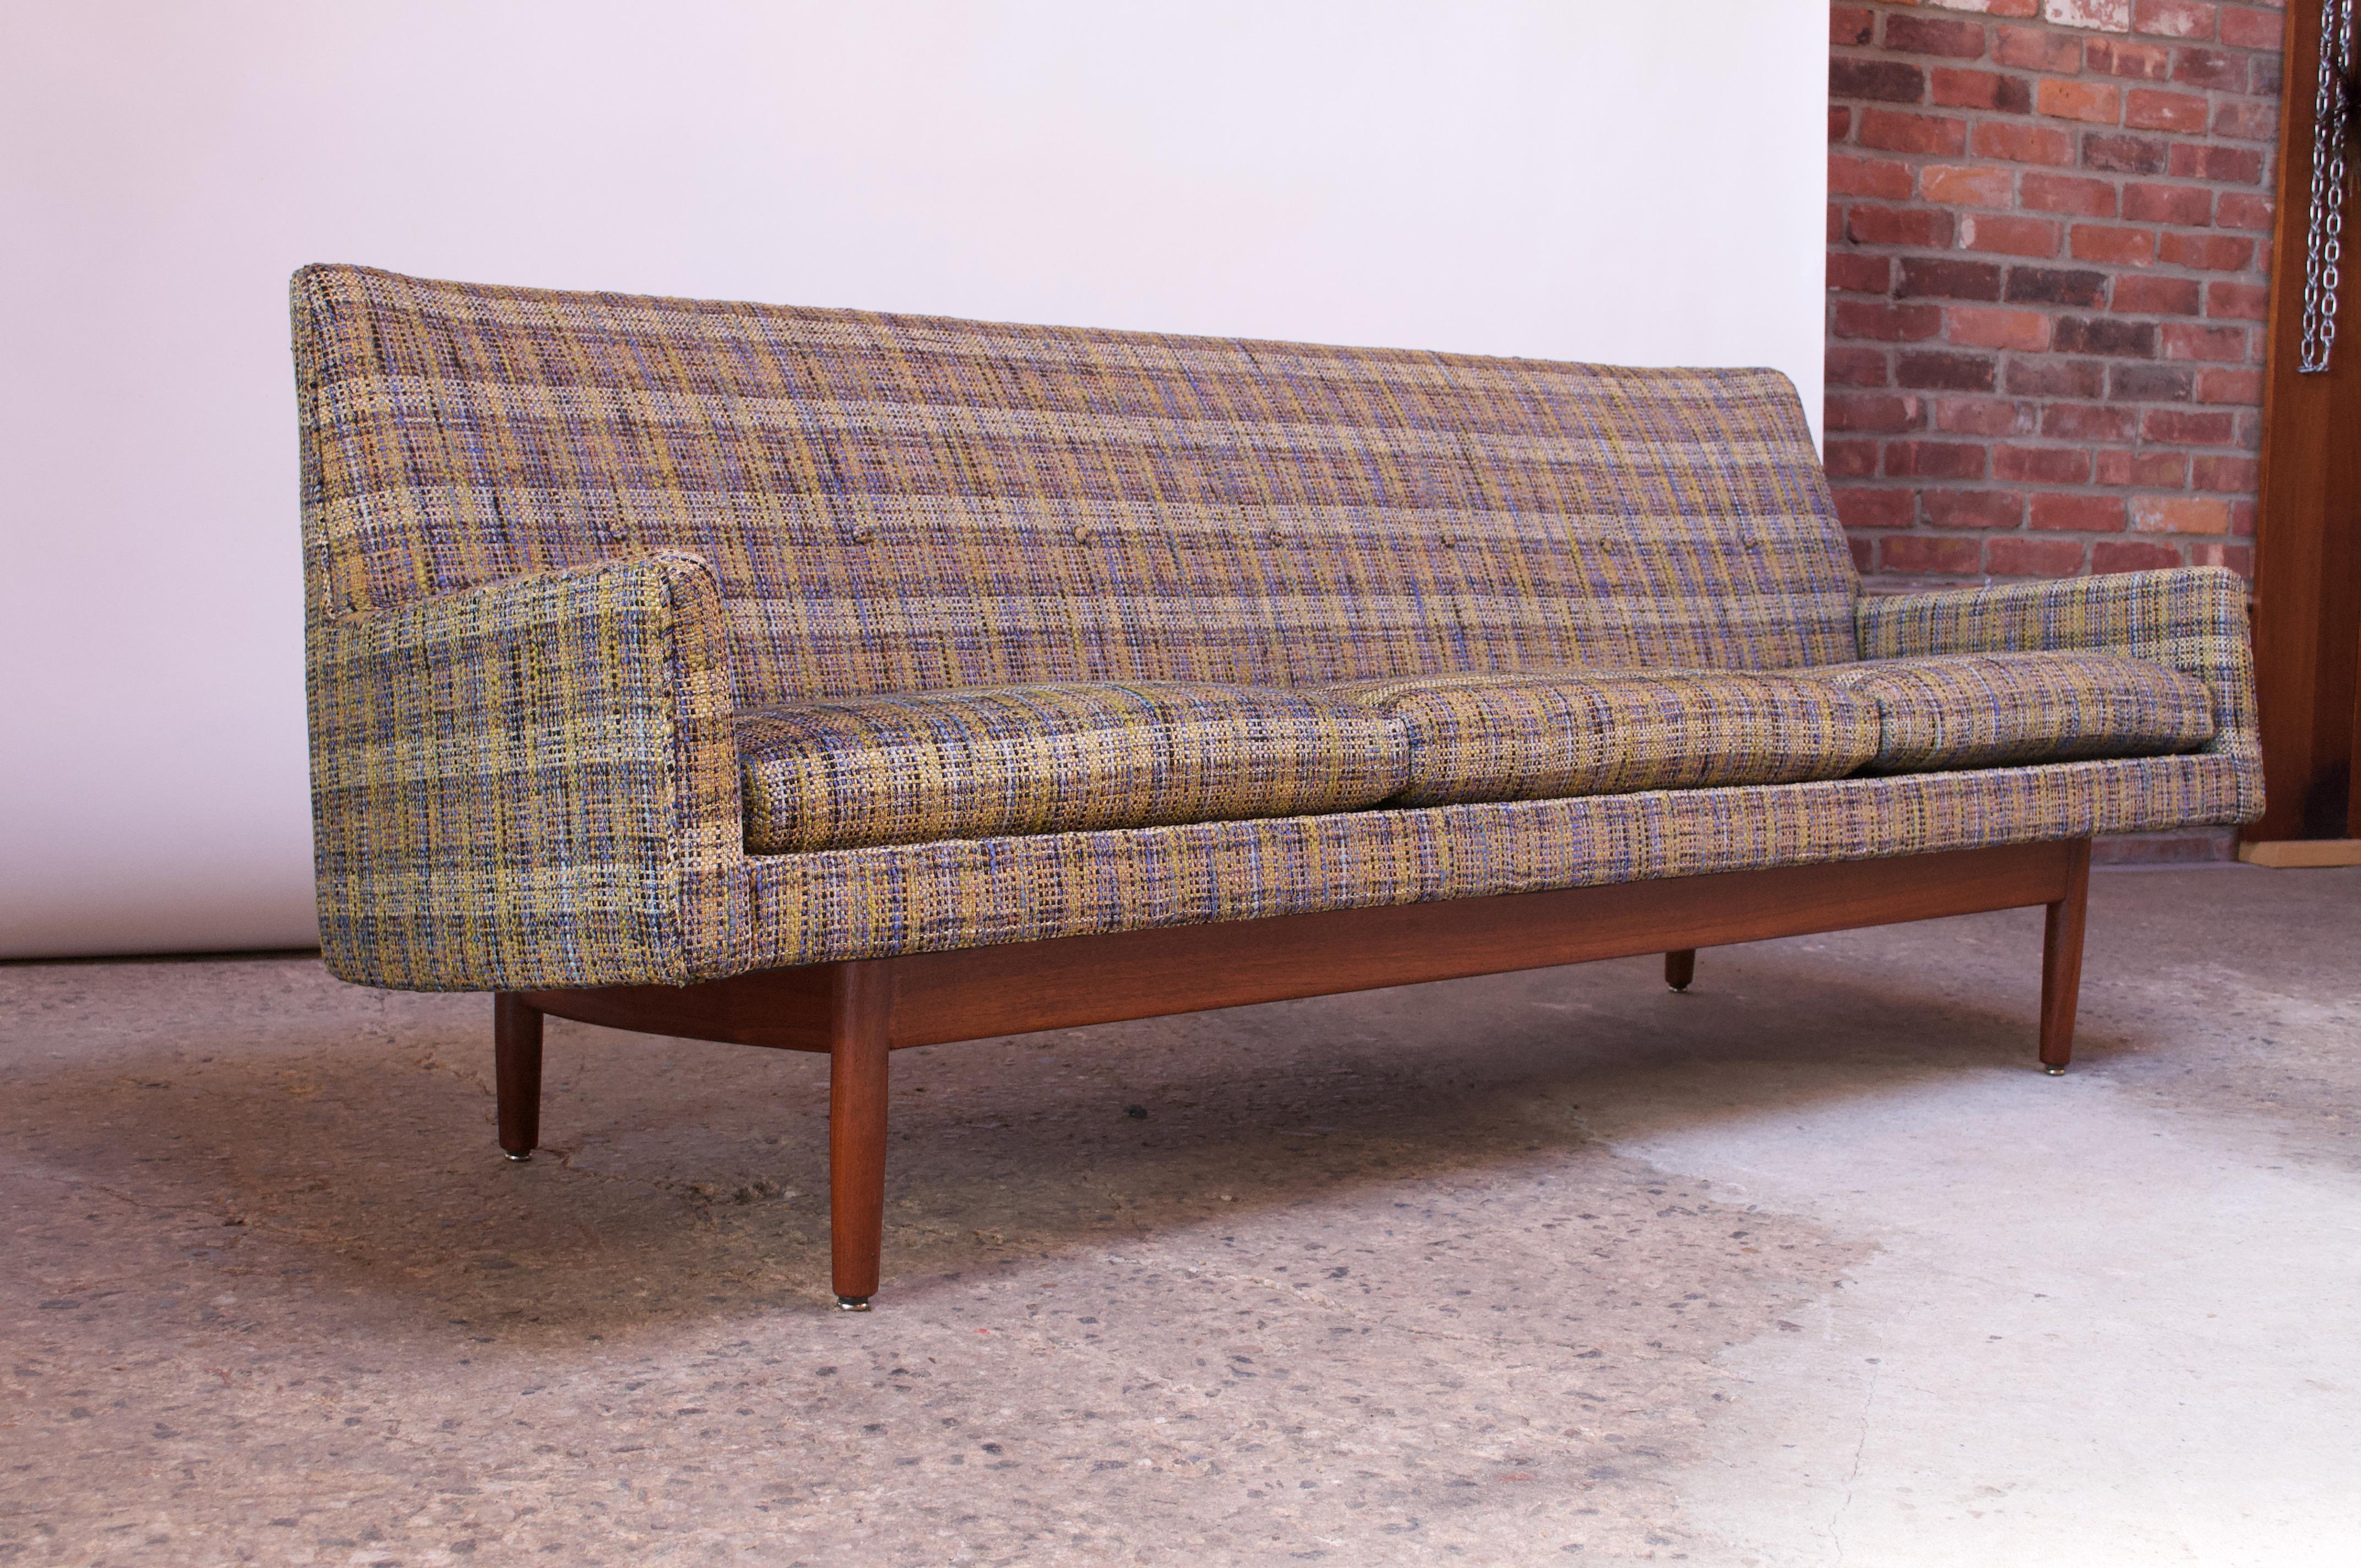 Handsome three-seat sofa designed by Jens Risom for Risom Design in the 1950s. Clean, sharp lines with a decorative button-tufted back detail. Sofa is supported by a sculptural walnut base. The plaid tweed upholstery in an attractive weave of navy,